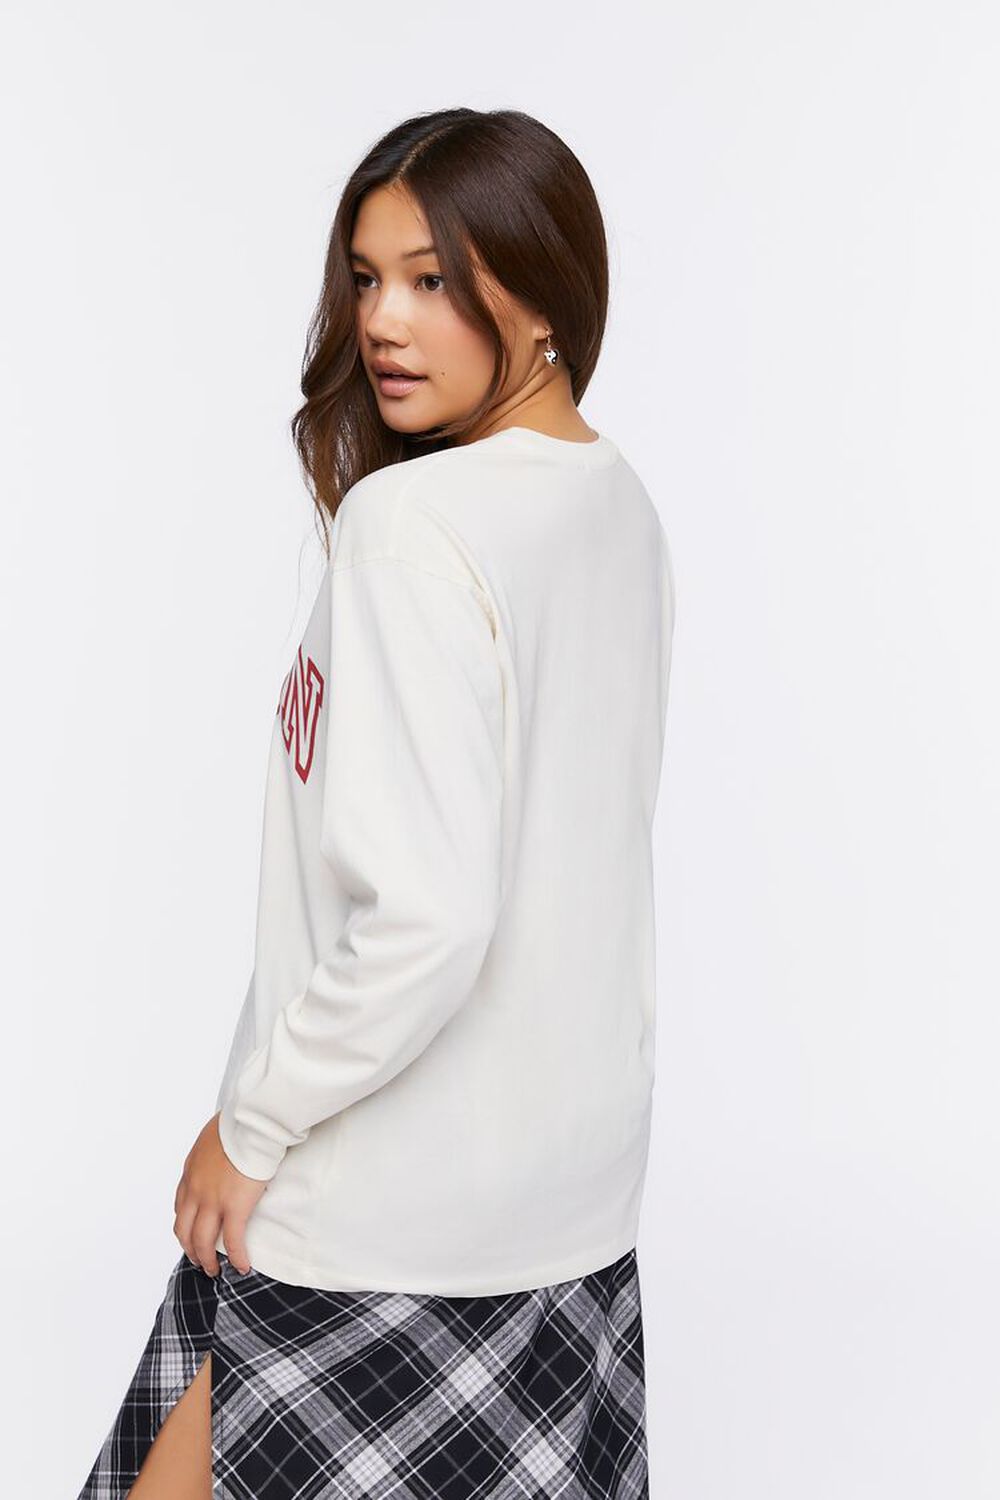 BEIGE/RED Boston Graphic Long-Sleeve Tee, image 3